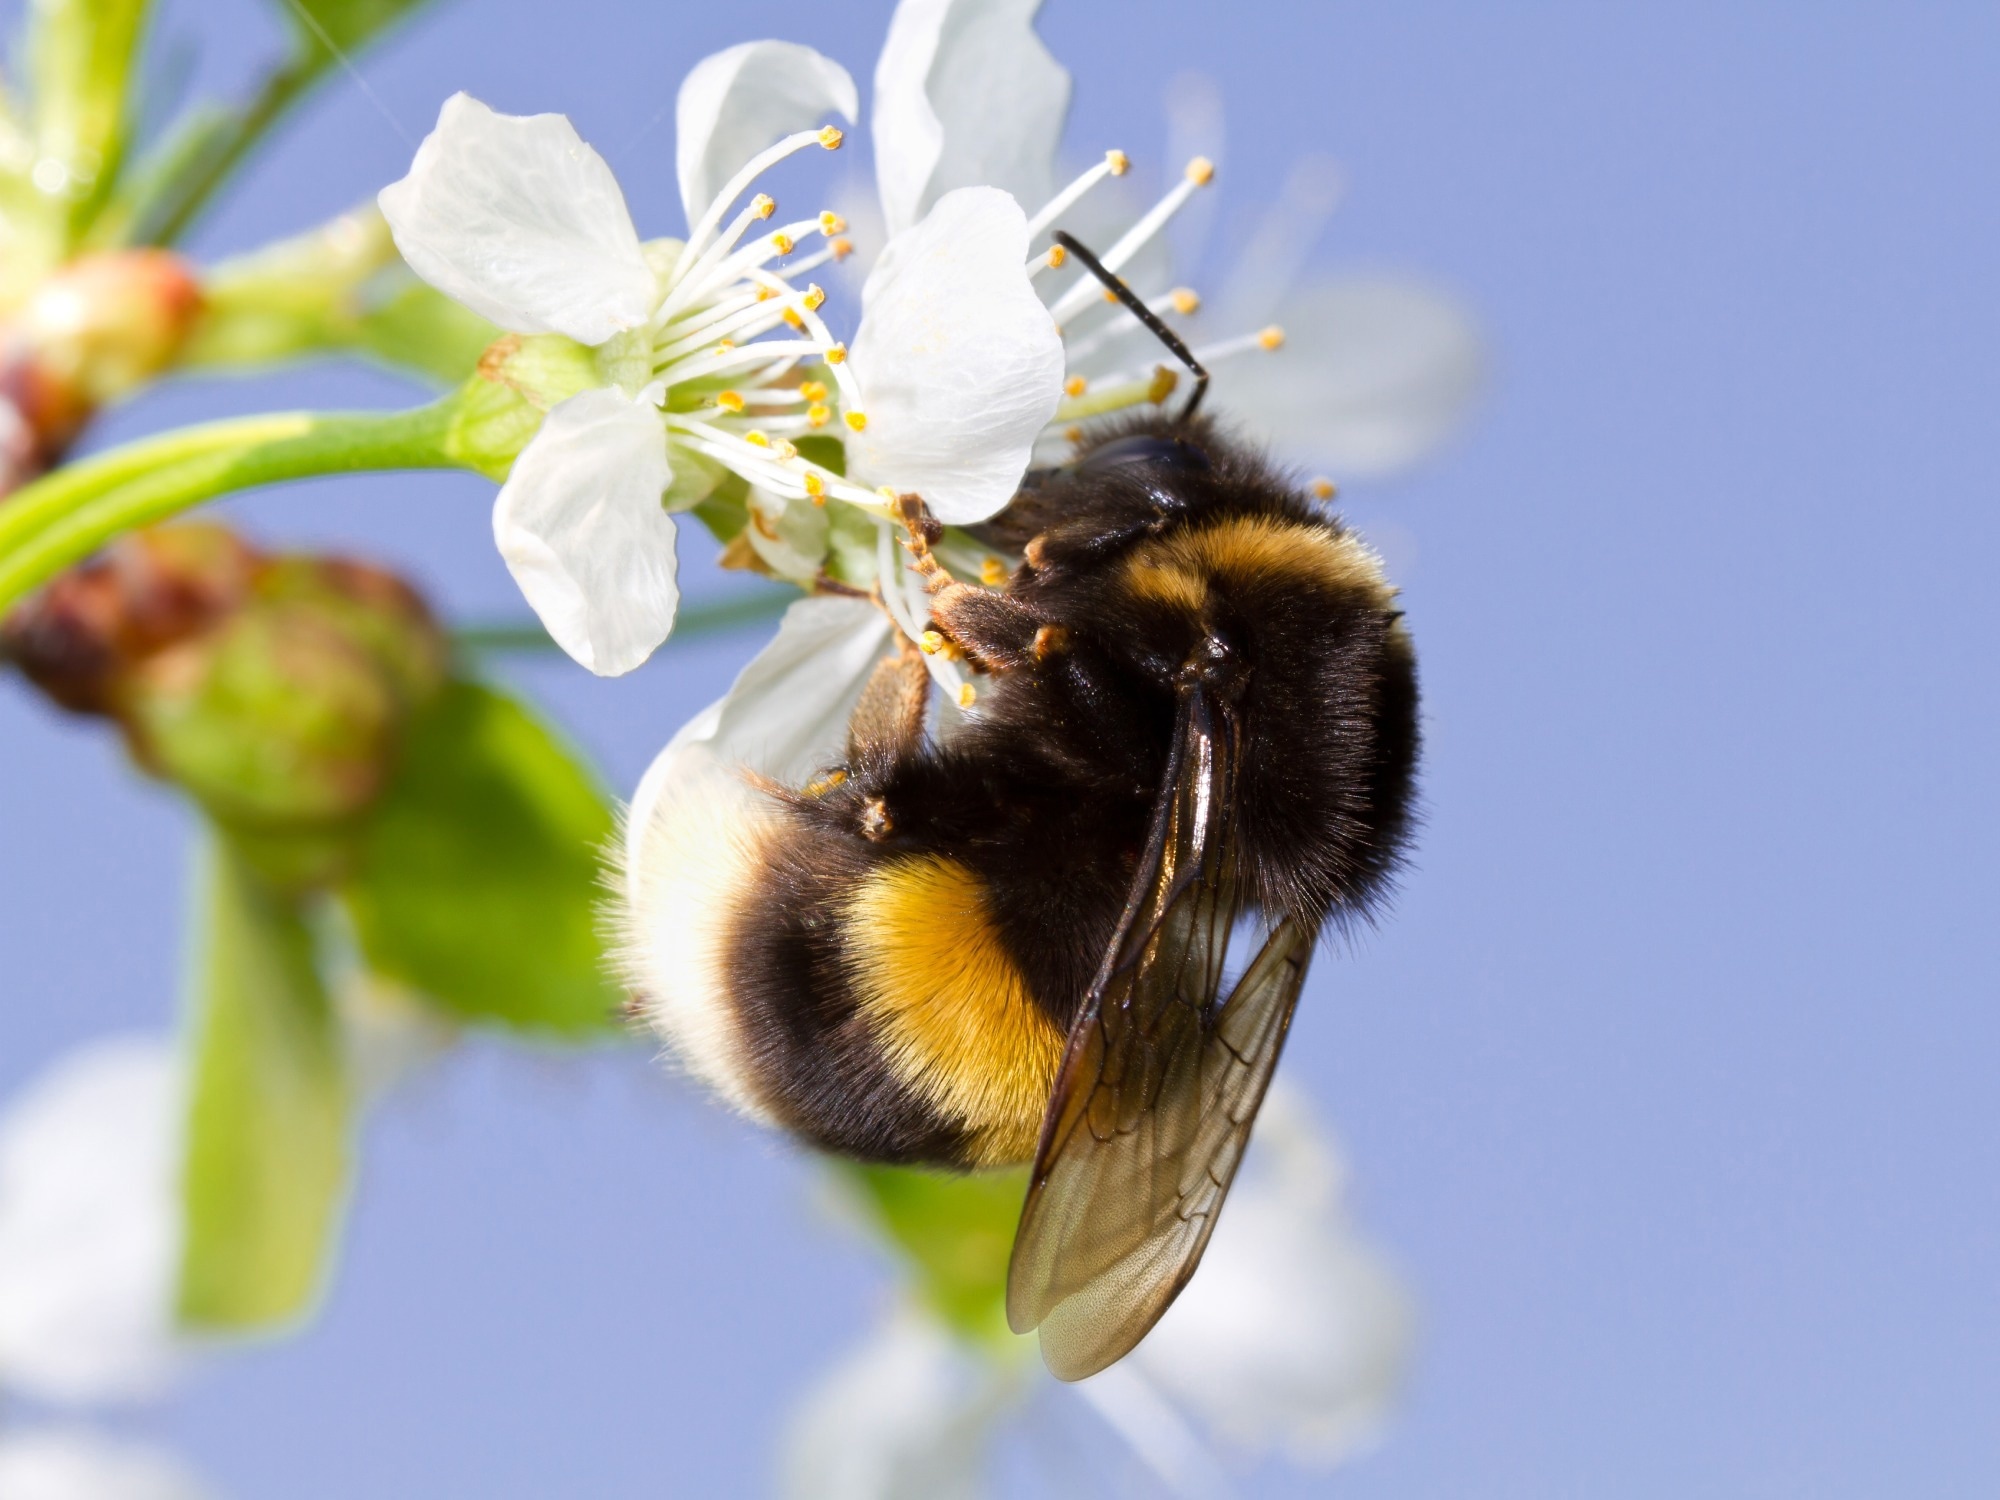 Changing Temperatures are a Major Environmental Factor Driving Changes in Bumble Bee Community.